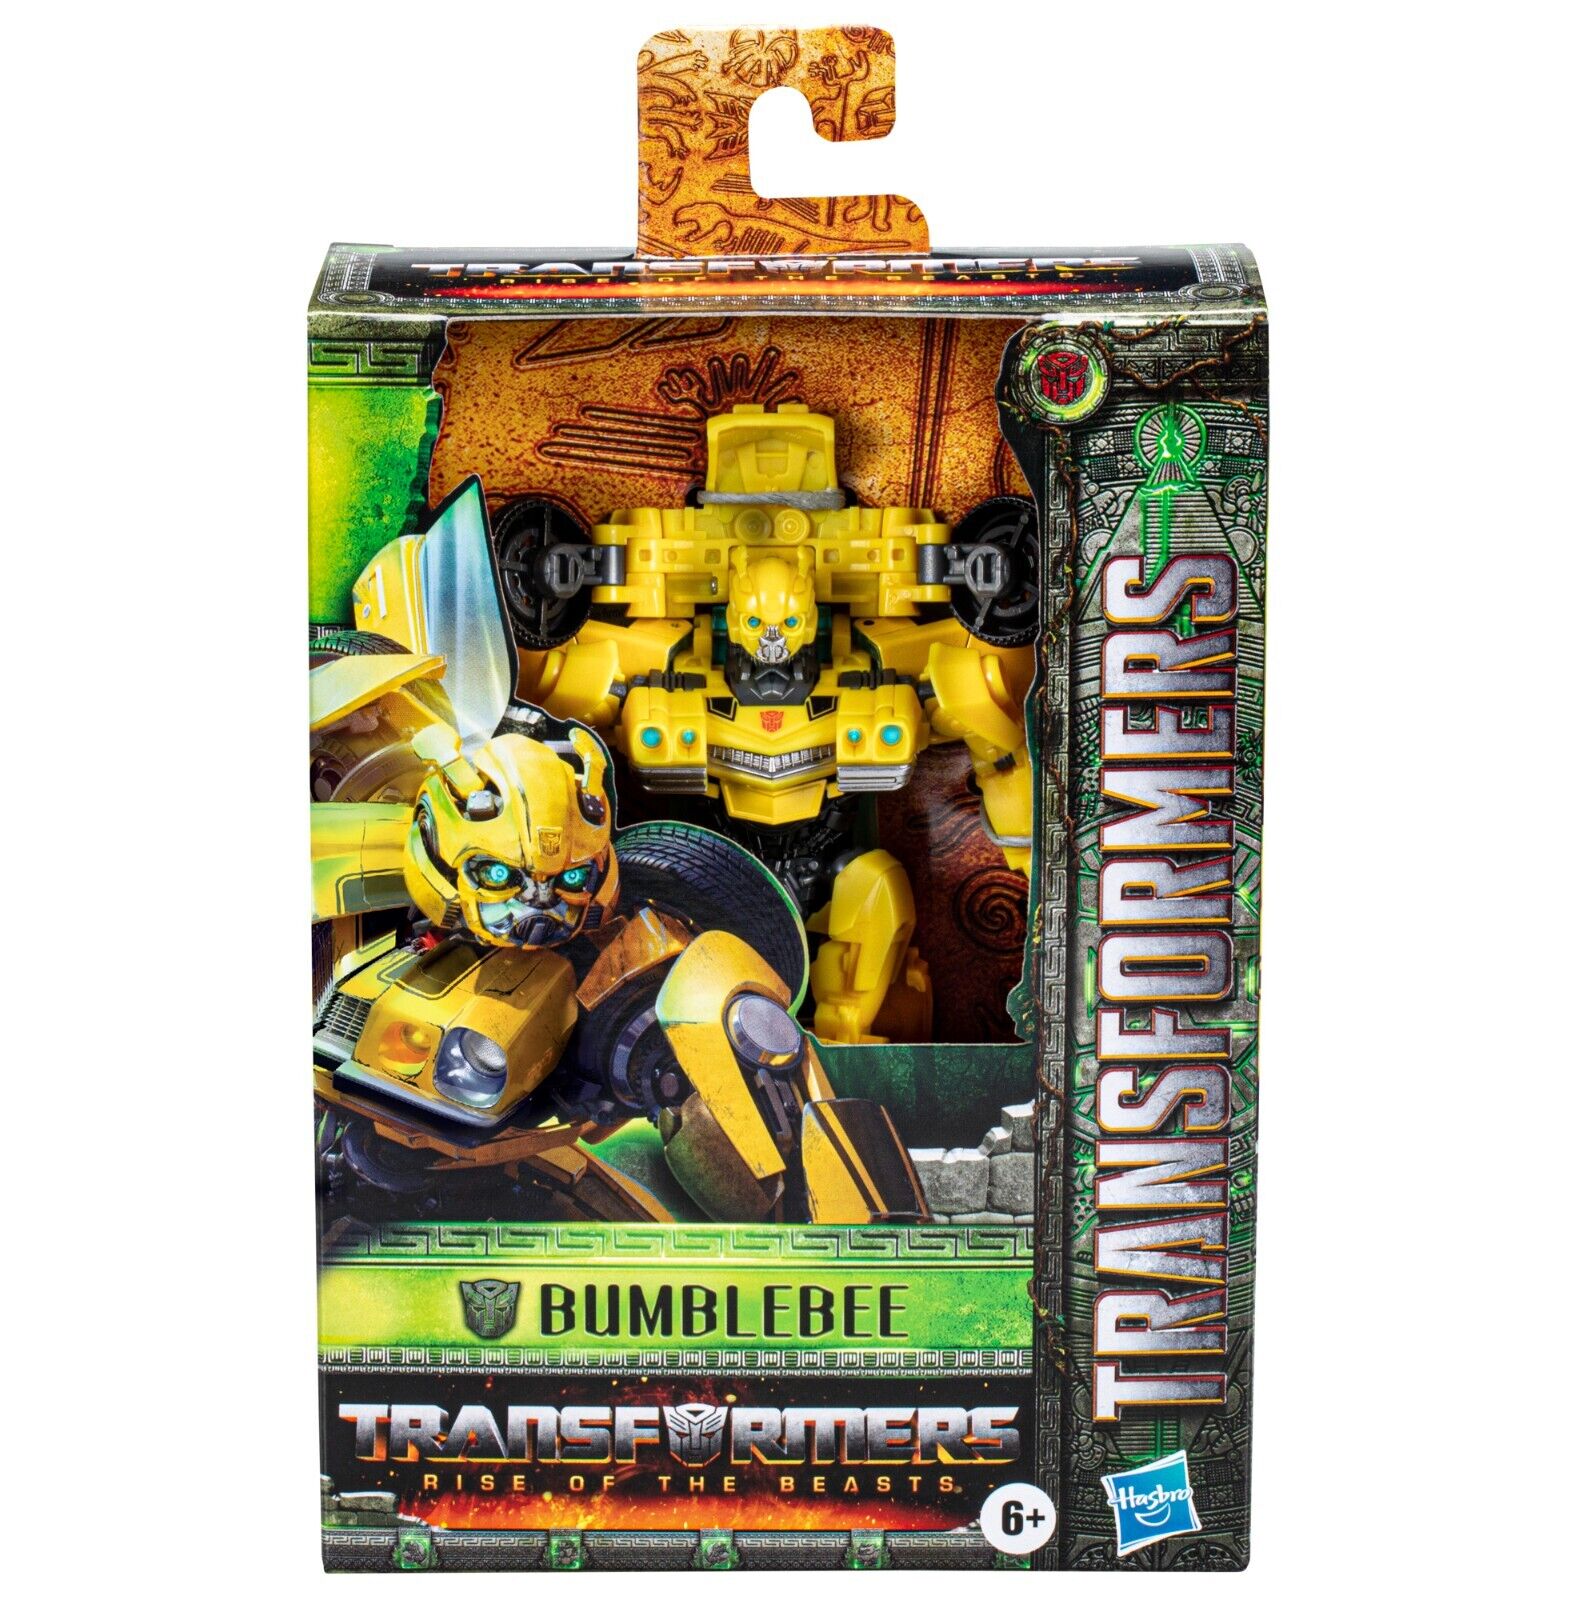 Transformers Rise of the Beasts Core Deluxe Hahmo Bumblebee